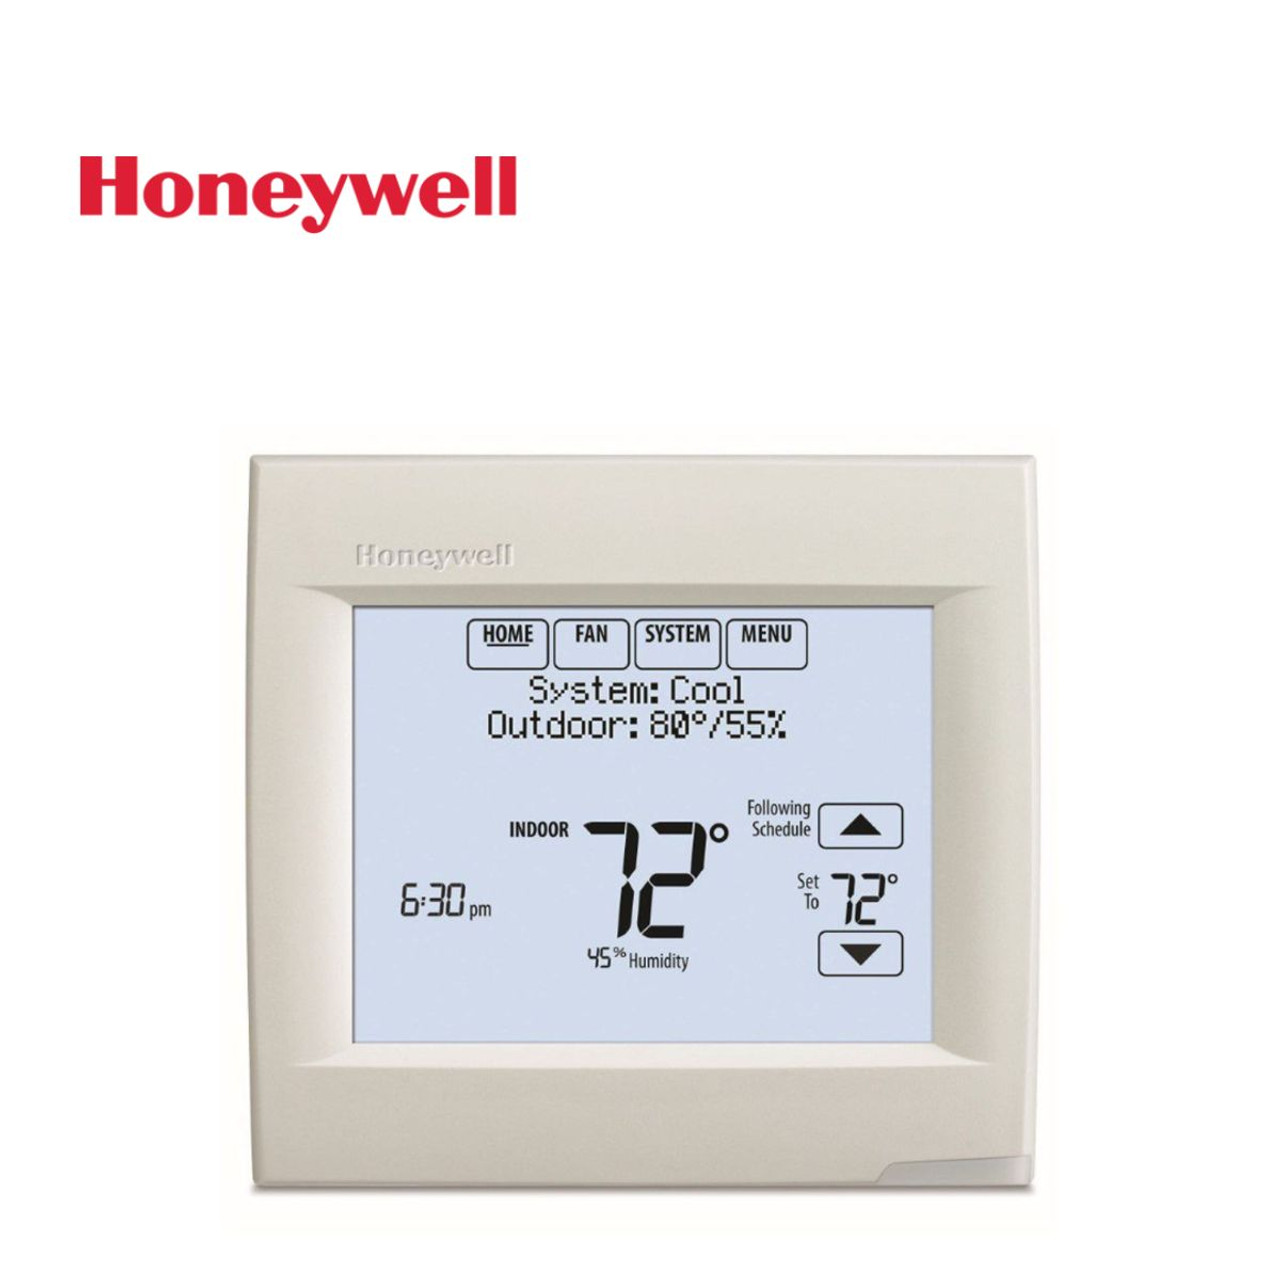 Honeywell Vision Pro 8000 Single Stage Touch Screen Thermostat product image